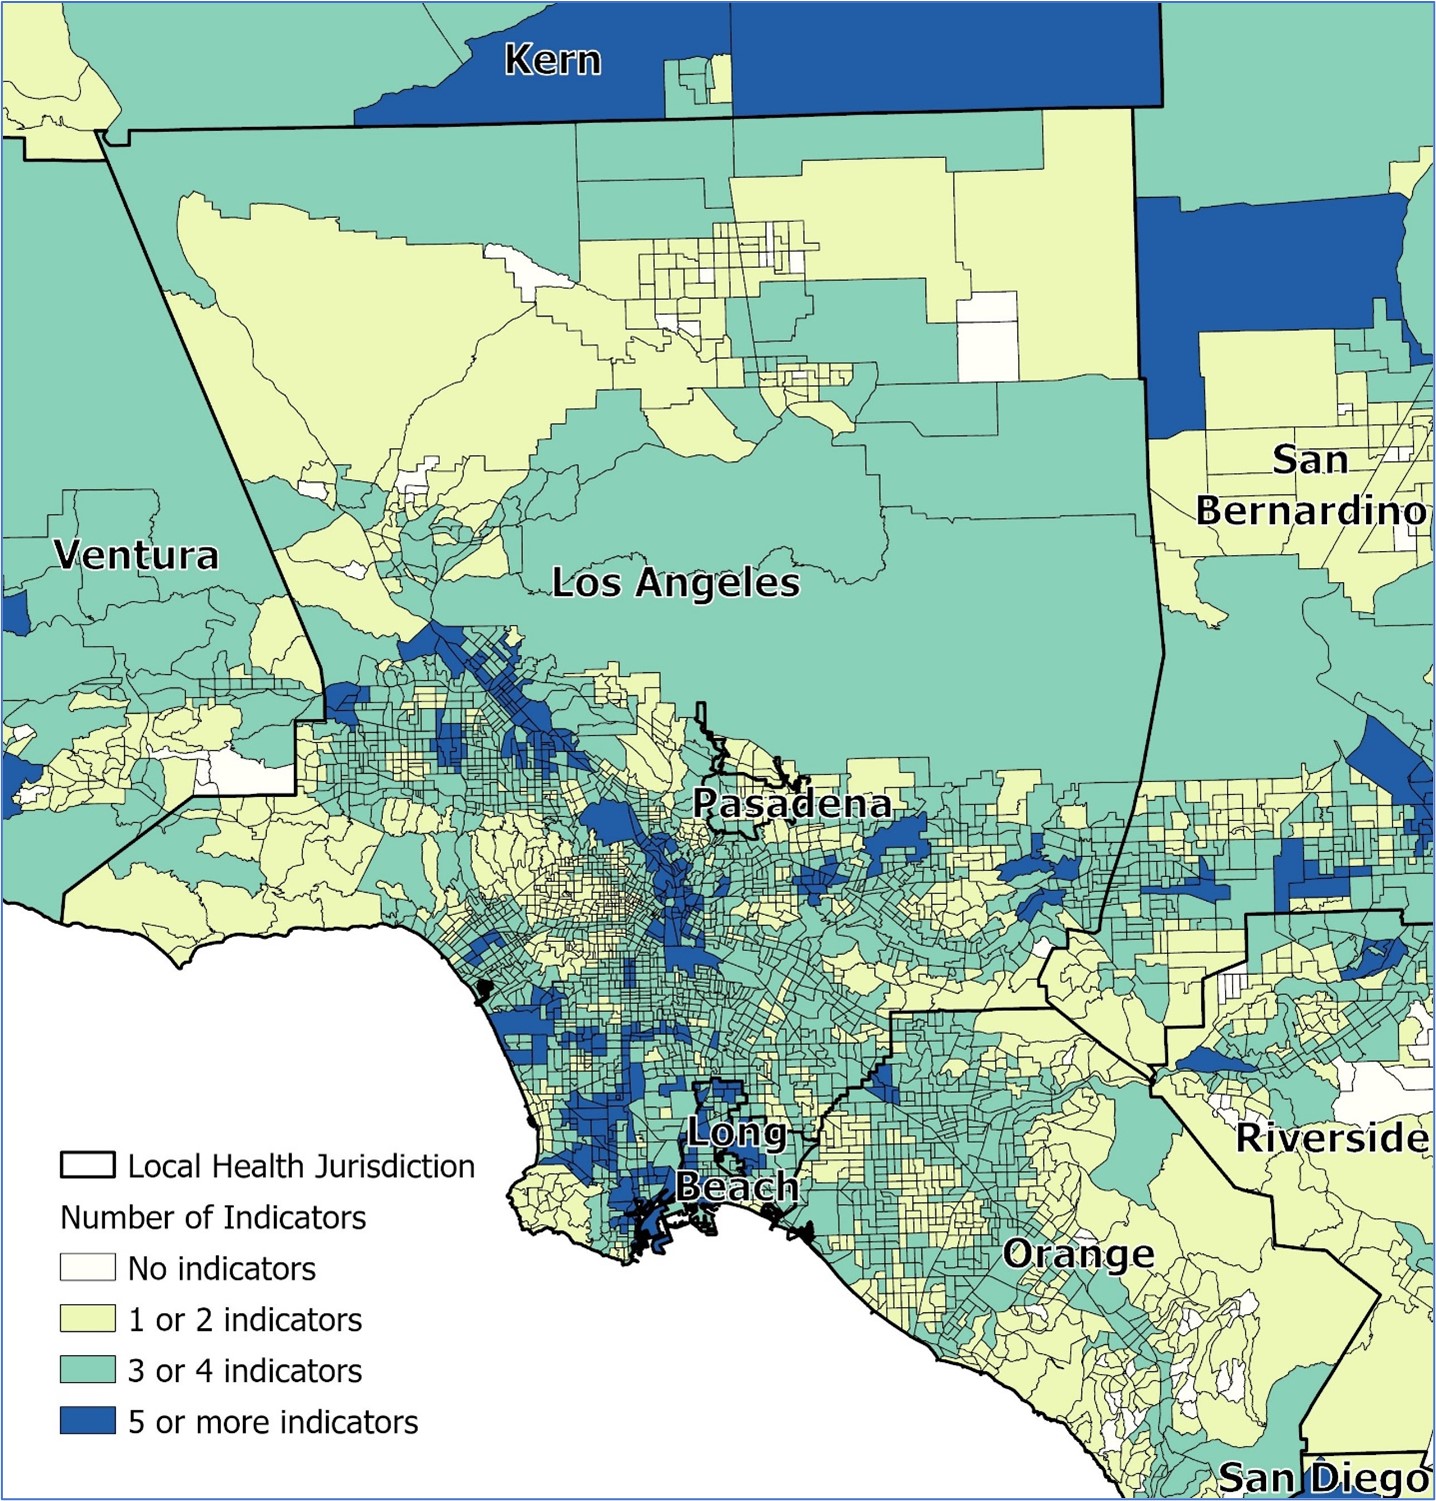 Map 2: Los Angeles area local health jurisdictions' census tracts by number of geospatial indicators of risk for childhood lead